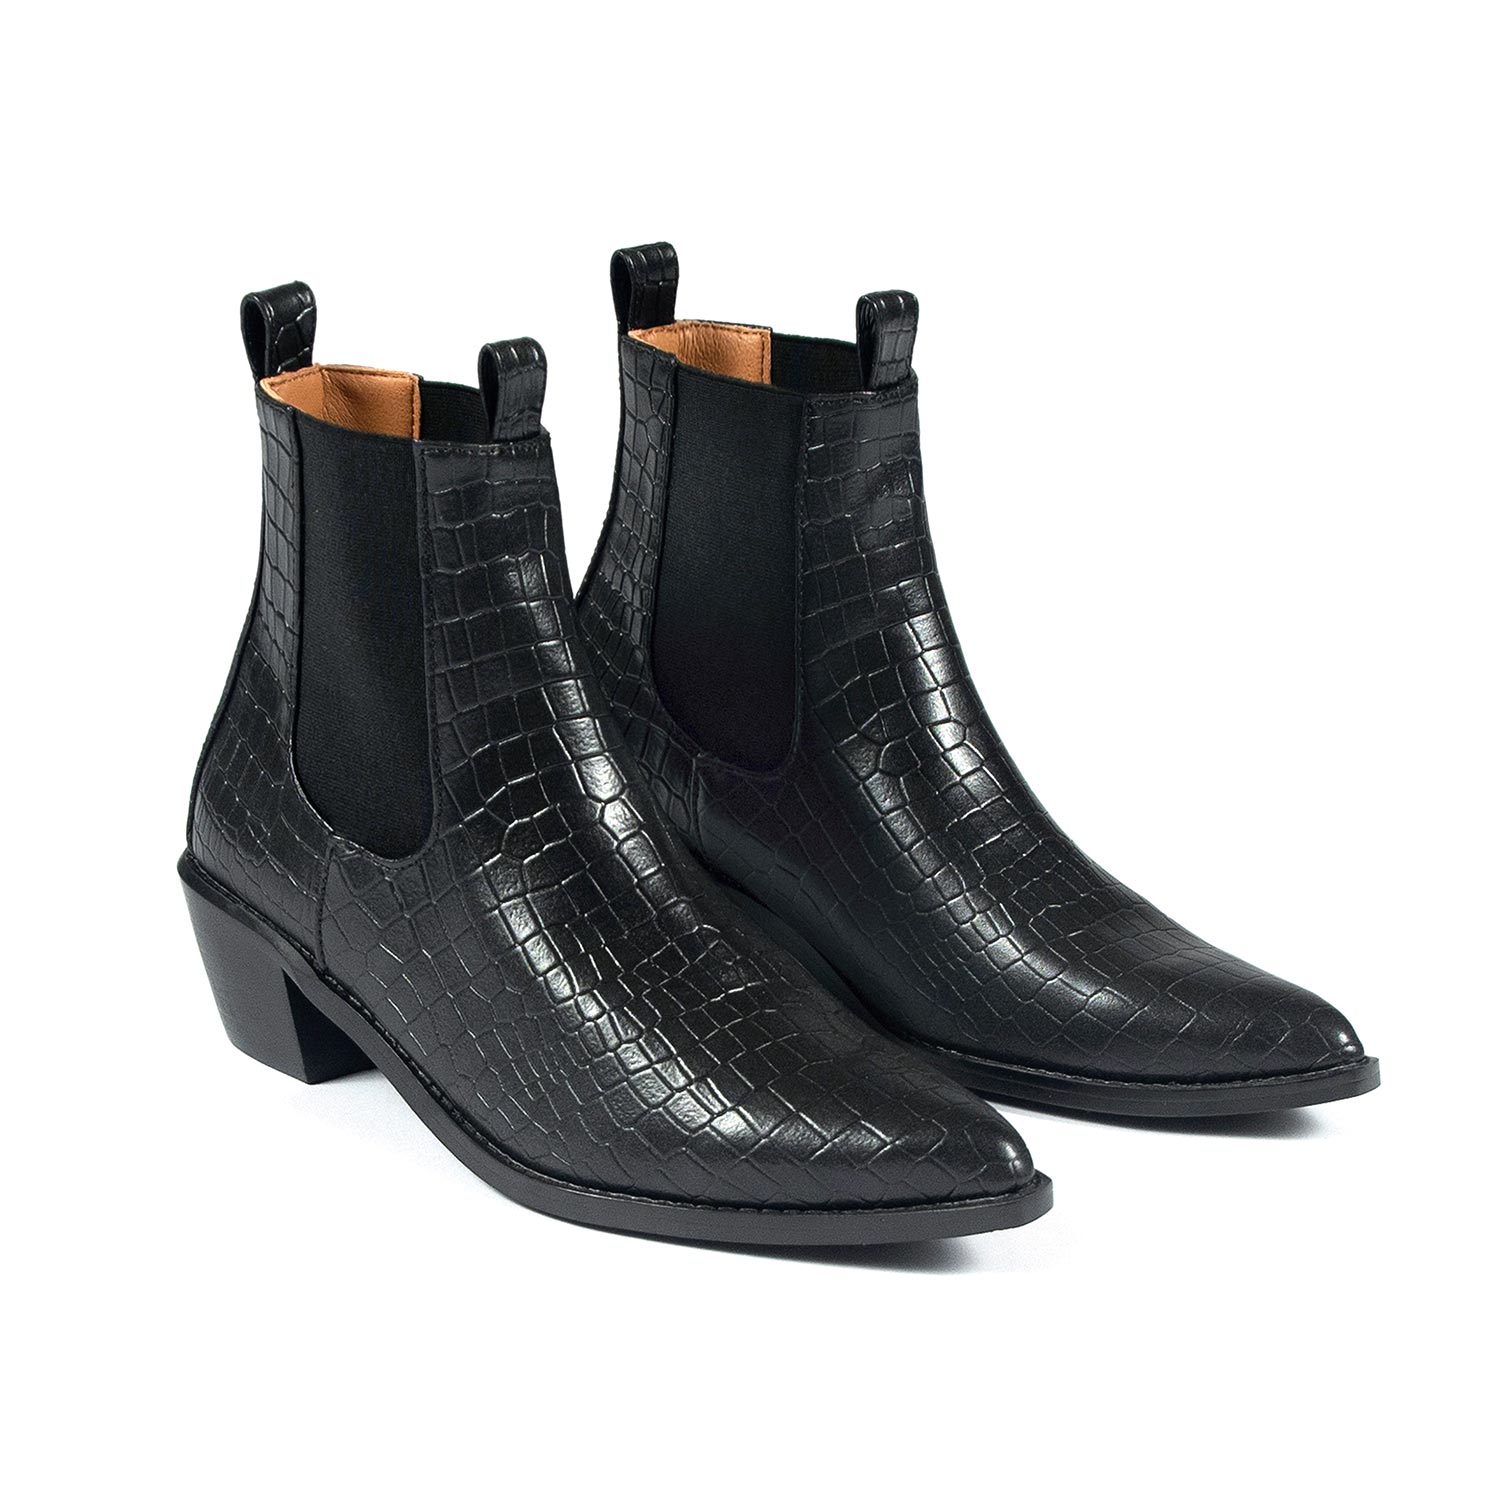 grå Medarbejder Bevise Vegan Addison - Black Snakeskin Faux Leather Chelsea Boots (Size 6, 7, 7.5,  8, 8.5, 9, 9.5, 10, 11, 12) | Straight To Hell Apparel